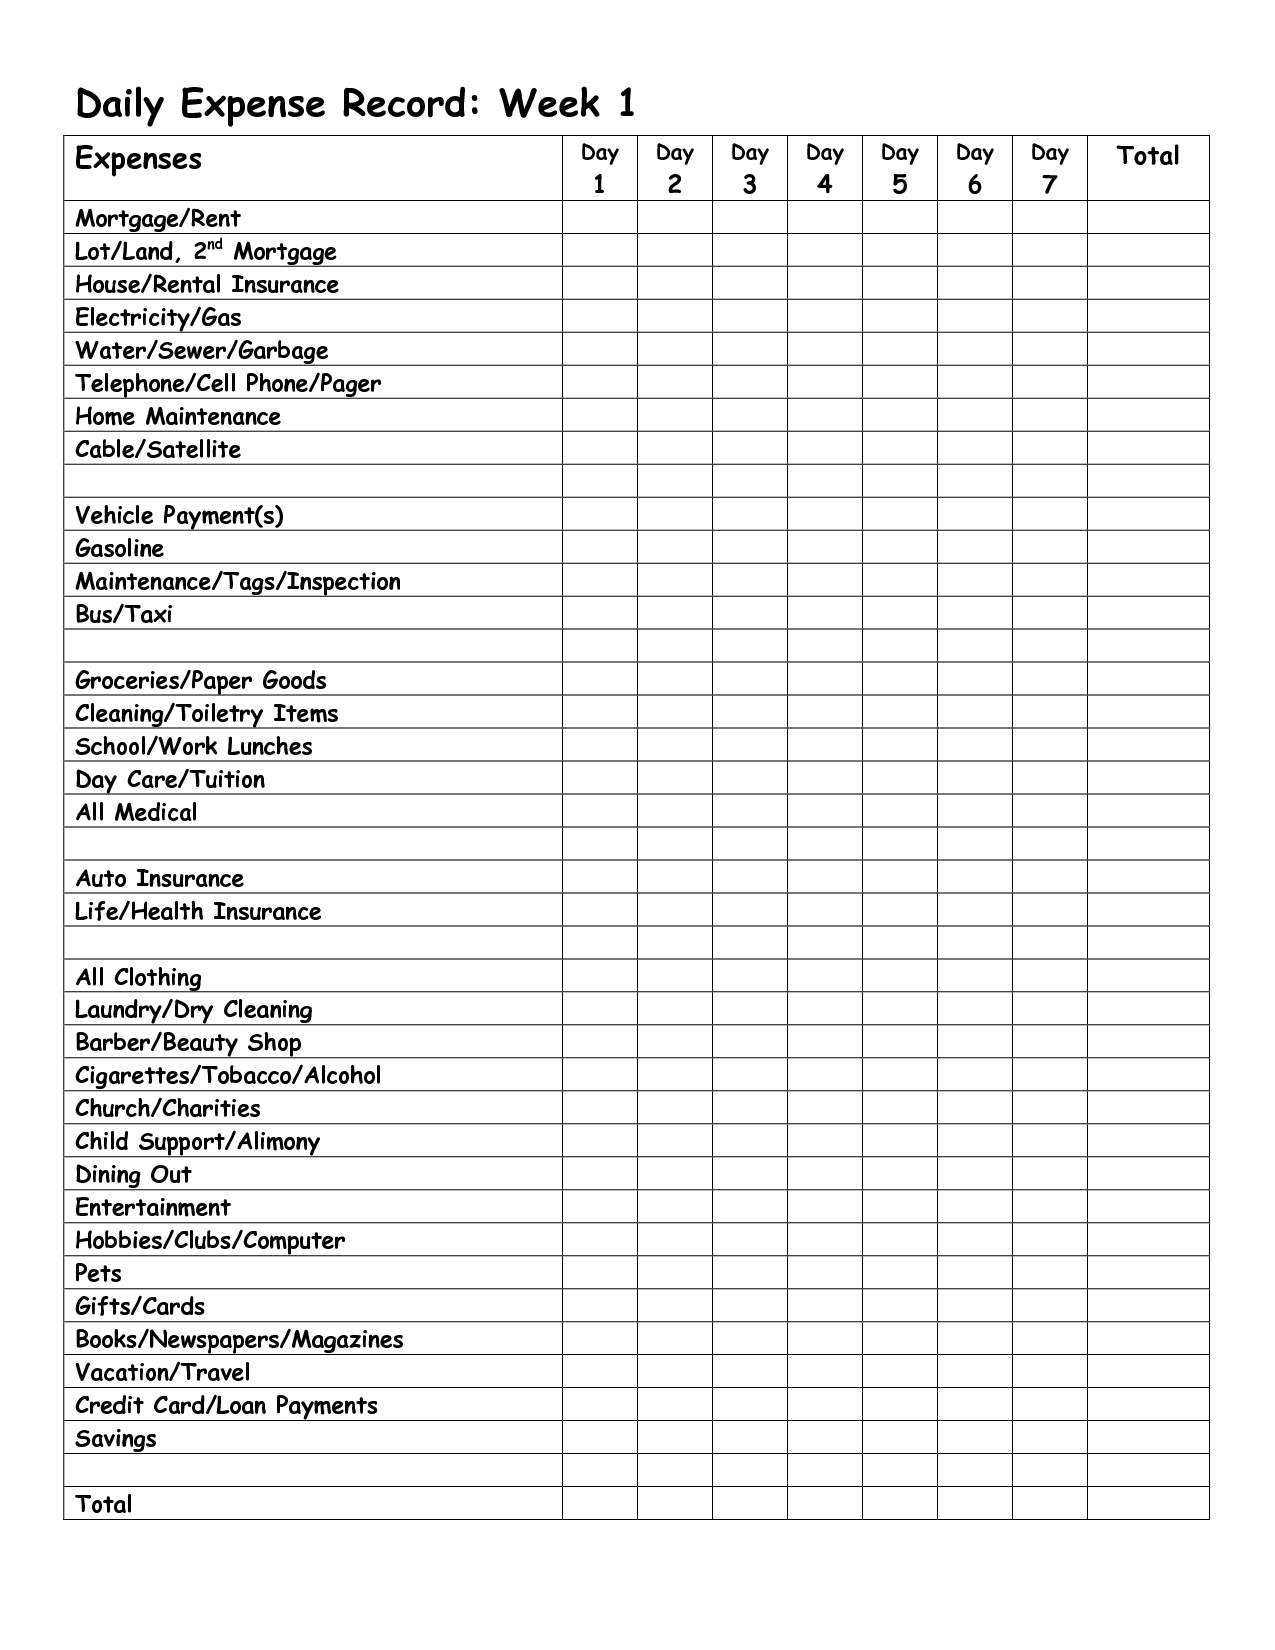 Monthly Expense Report Template | Daily Expense Record Week With Daily Report Sheet Template